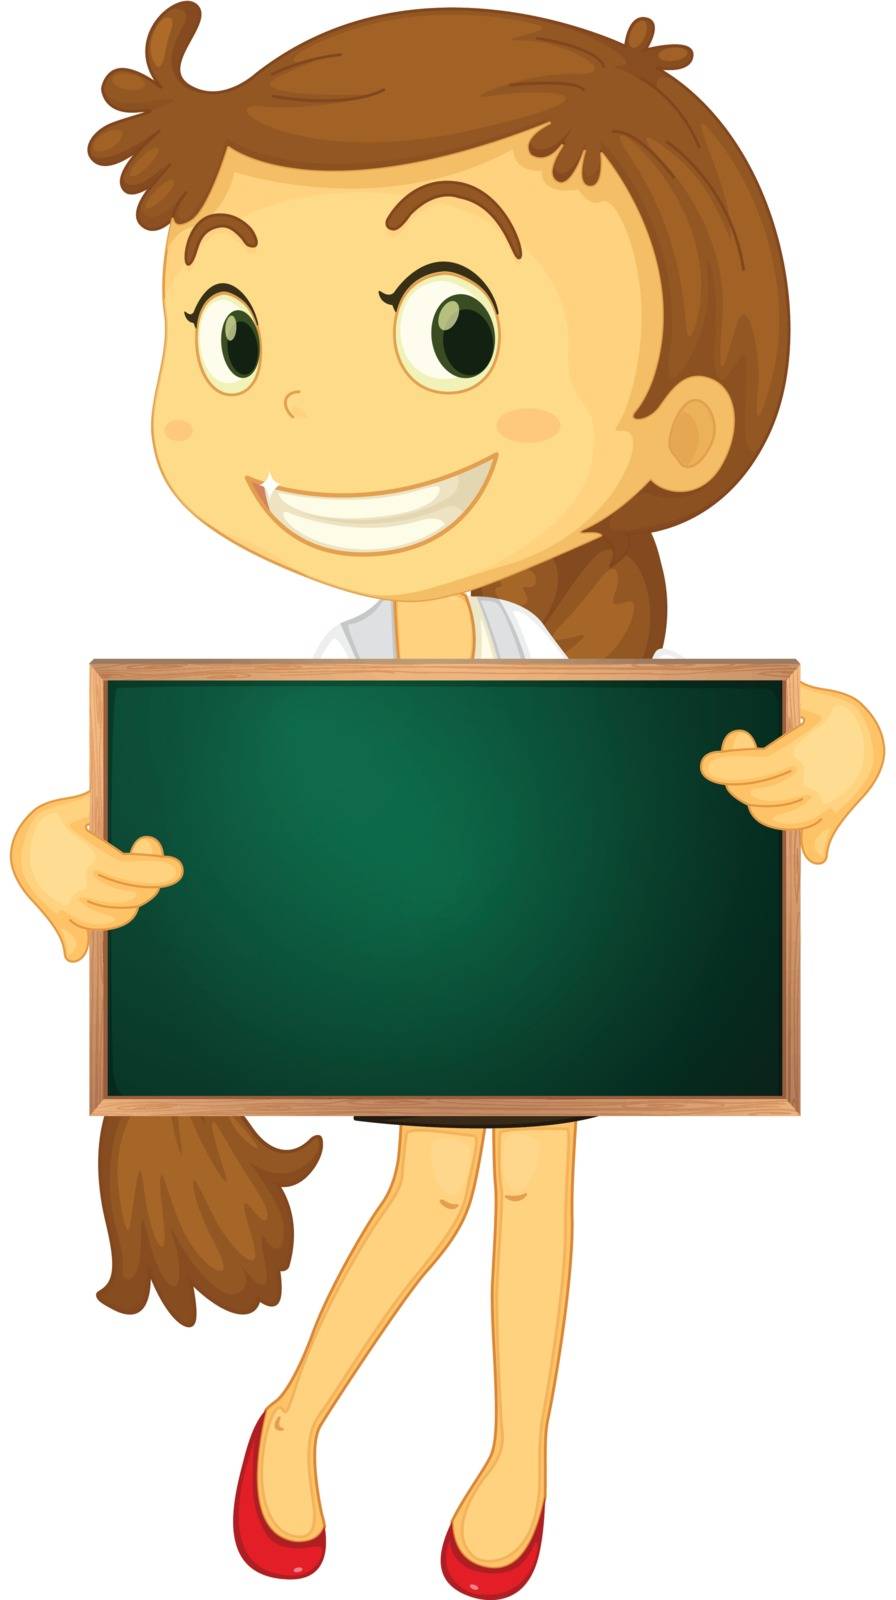 Illustration of a cartoon character holding a blank board